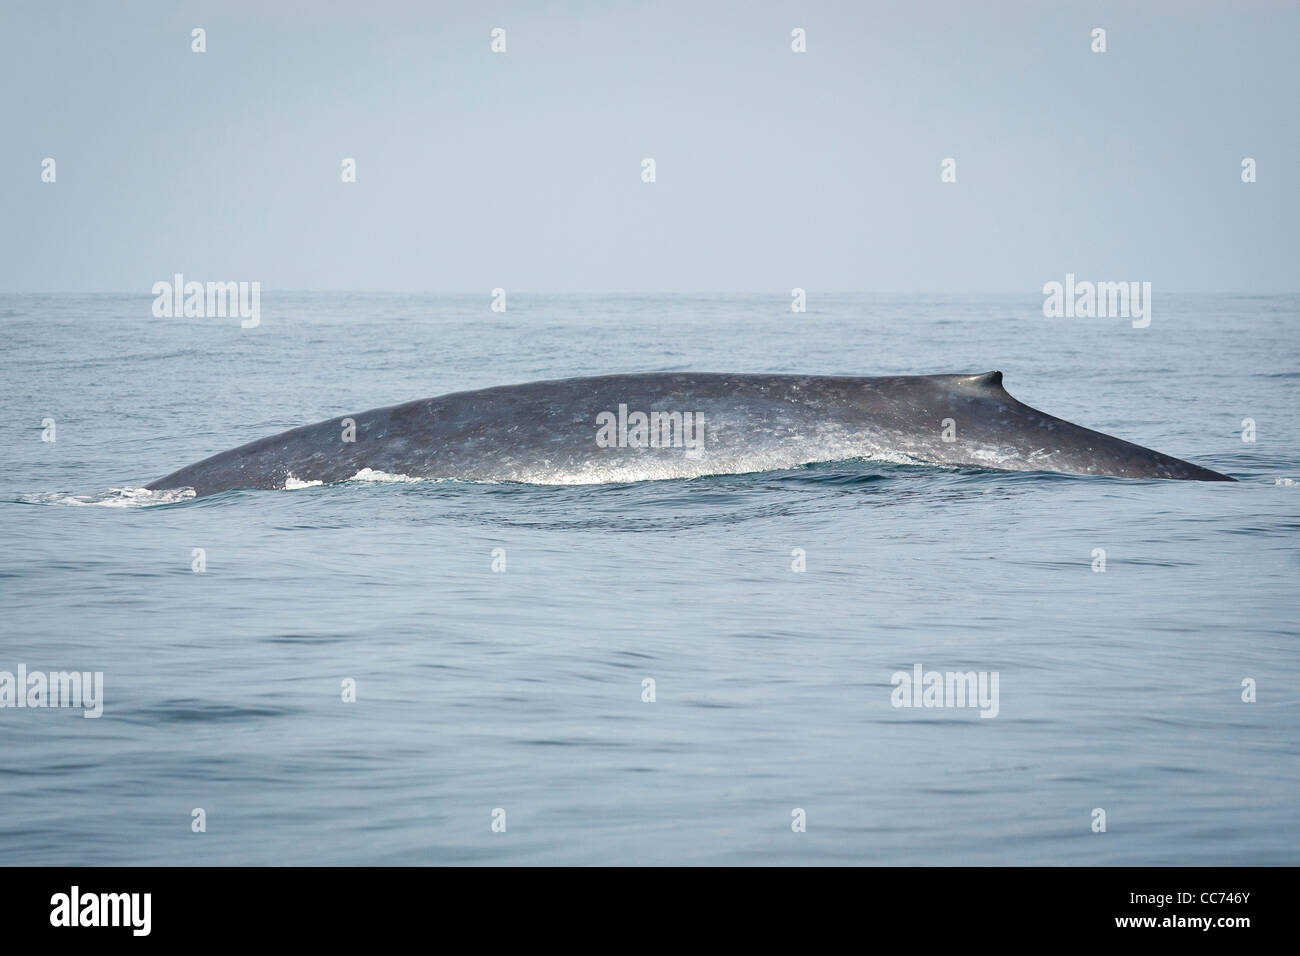 A Blue Whale breaching the surface of the Indian Ocean off the coast of Sri Lanka Stock Photo